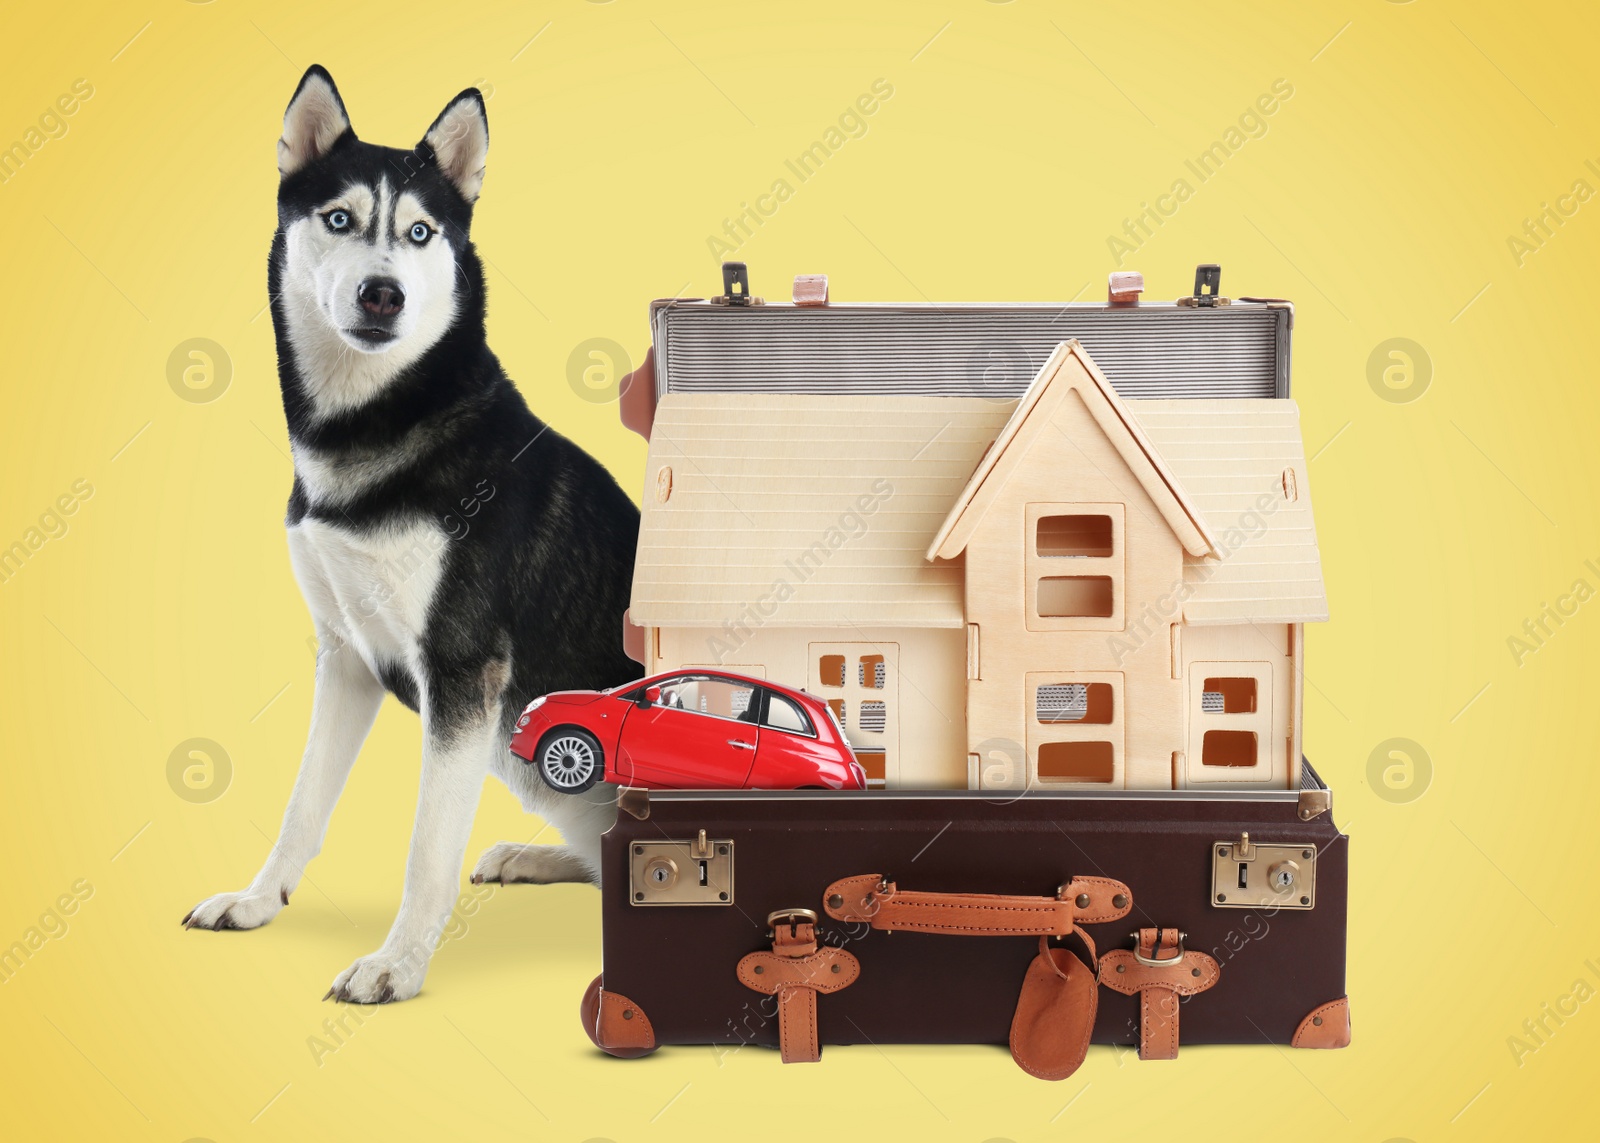 Image of Cute dog near retro suitcase with model of house and miniature car on yellow background